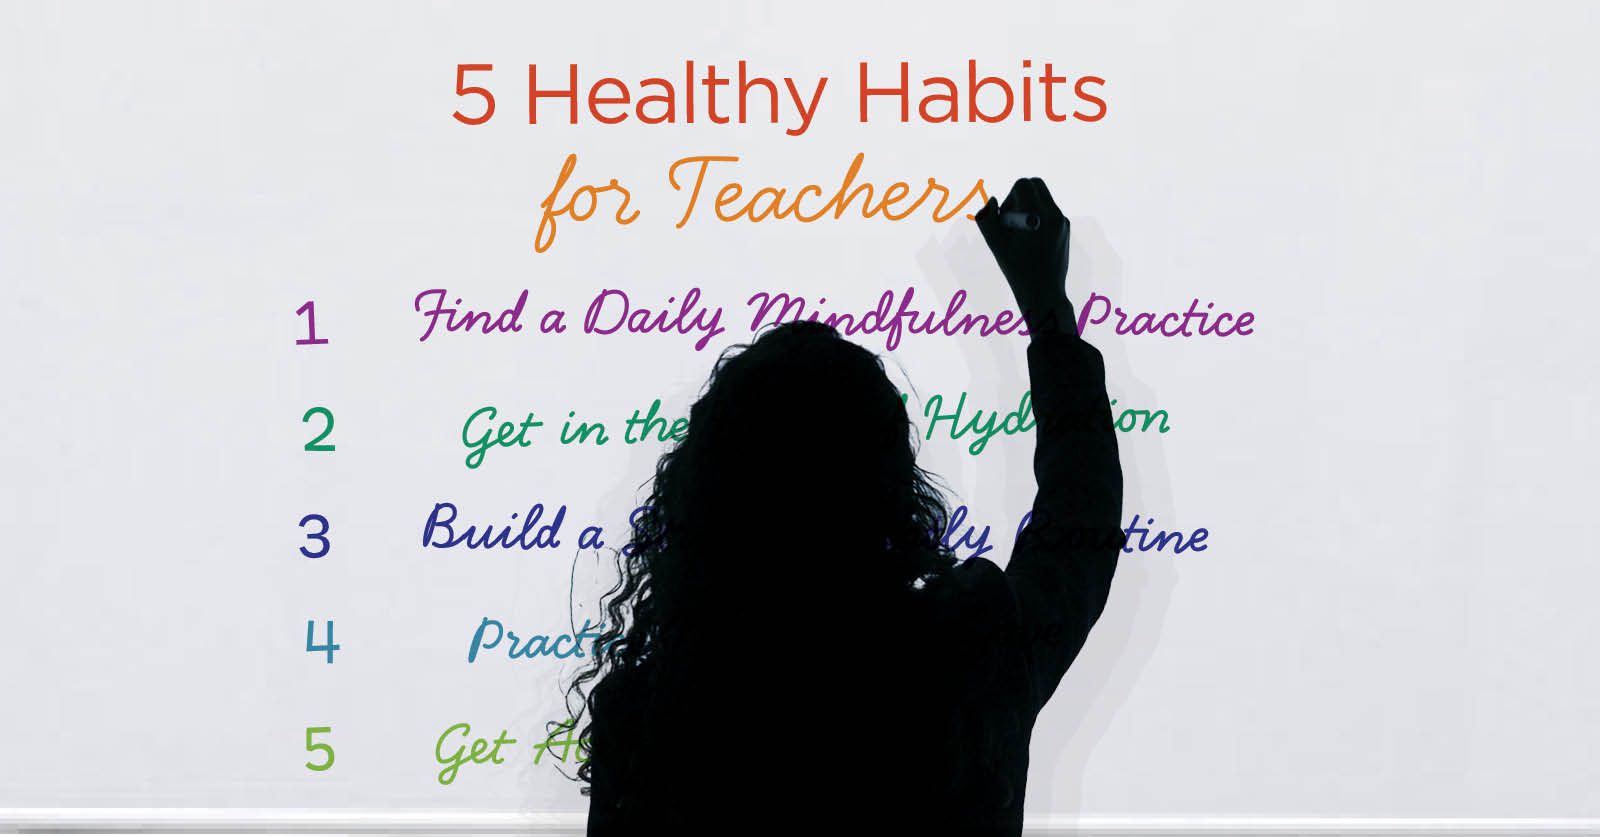 5 Healthy Habits for Teachers This Summer